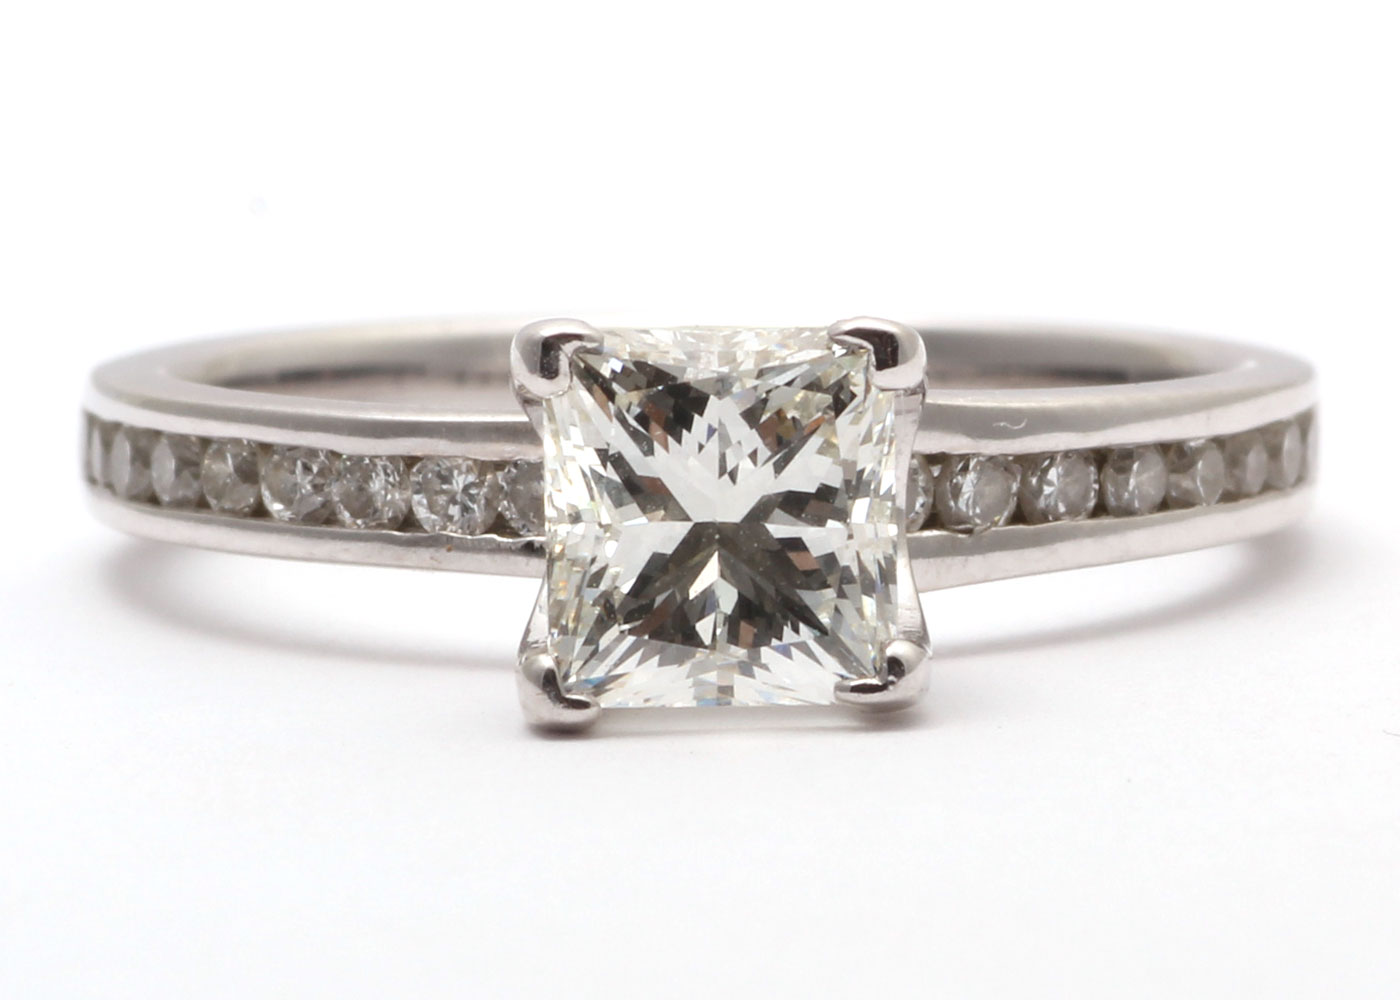 Flawless Princess Cut Diamond Ring With Stone Set Shoulders 1.37 Carats